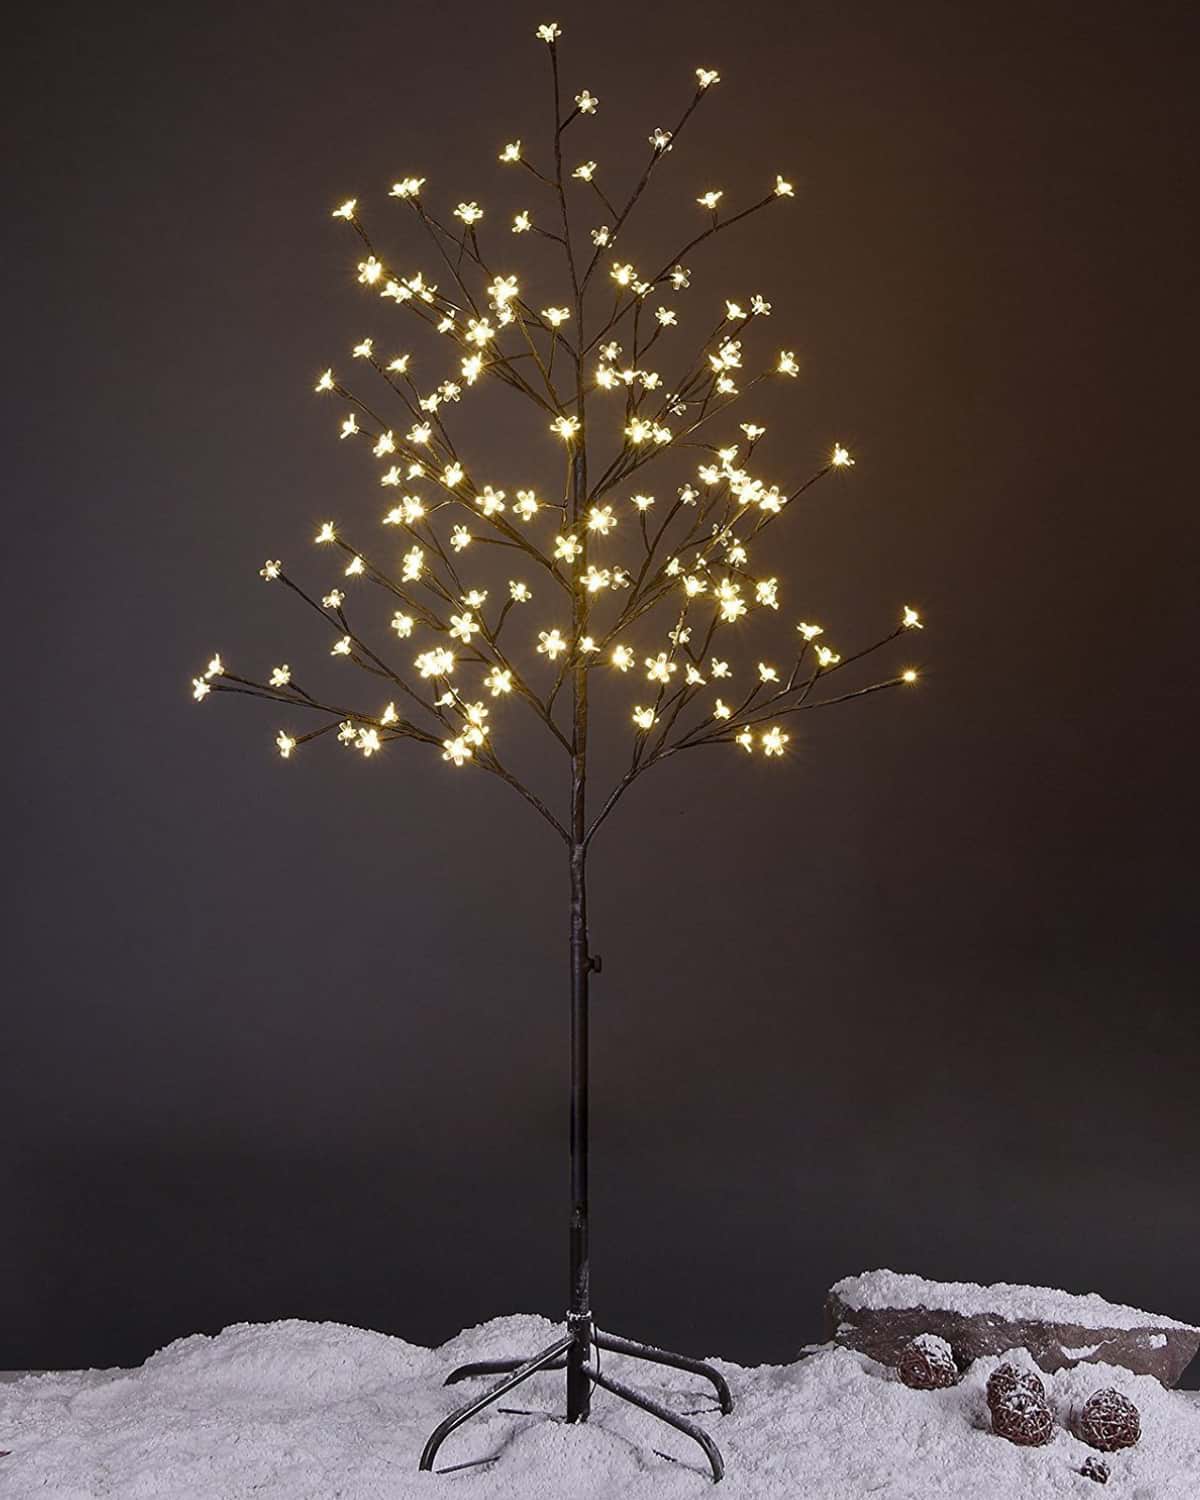 Lightshare LED Tree | High Tech Christmas Decorations To Get Into the Festive Holiday Season